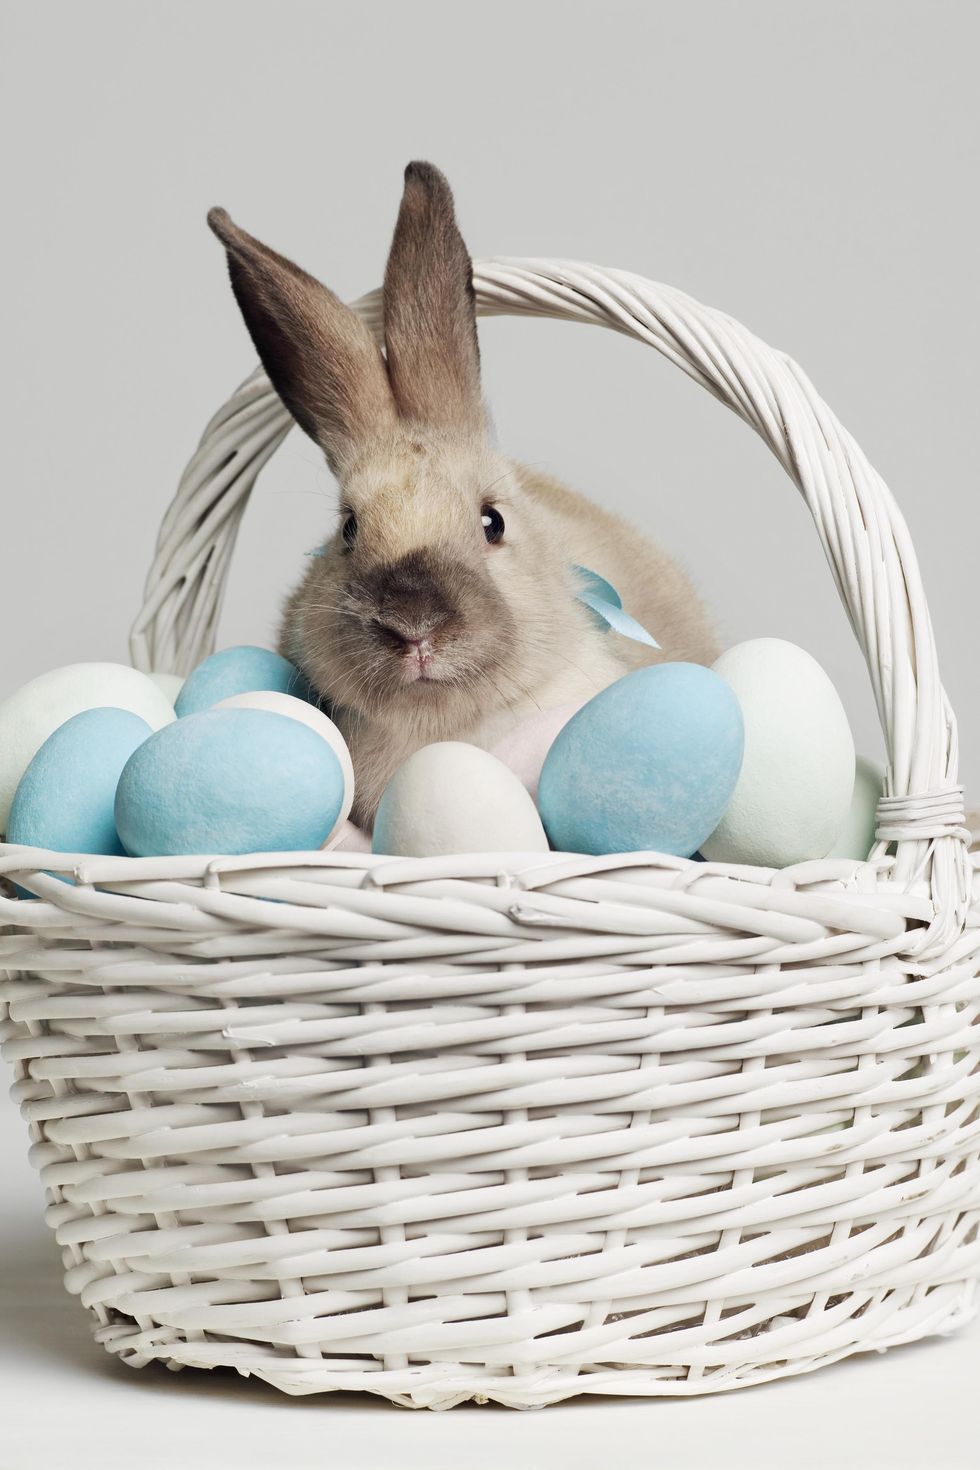 Easter 2023: Here's why Easter is associated with eggs and bunnies